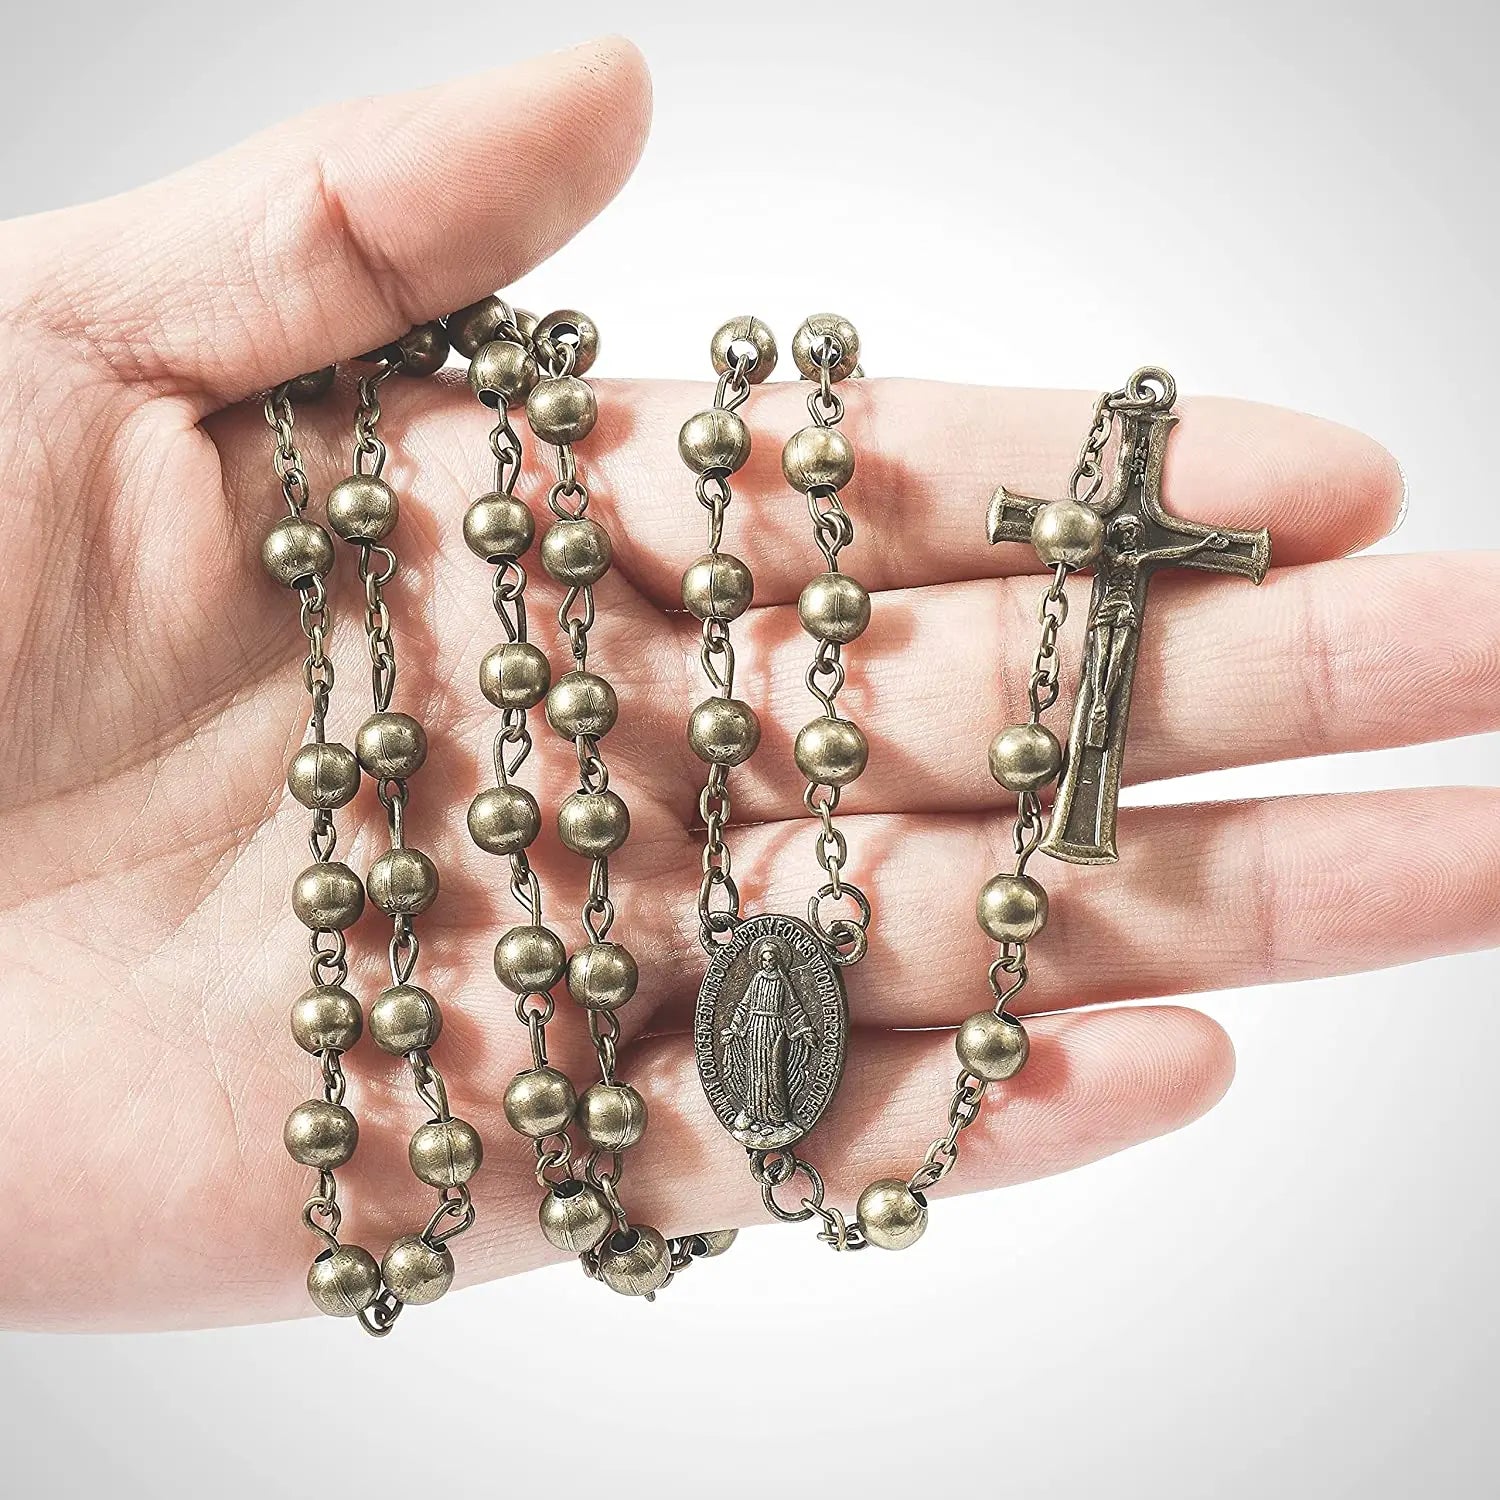 Combat Rosary Necklace Metal Beads St Therese Virgin Of The Smile Medal Nazareth Store